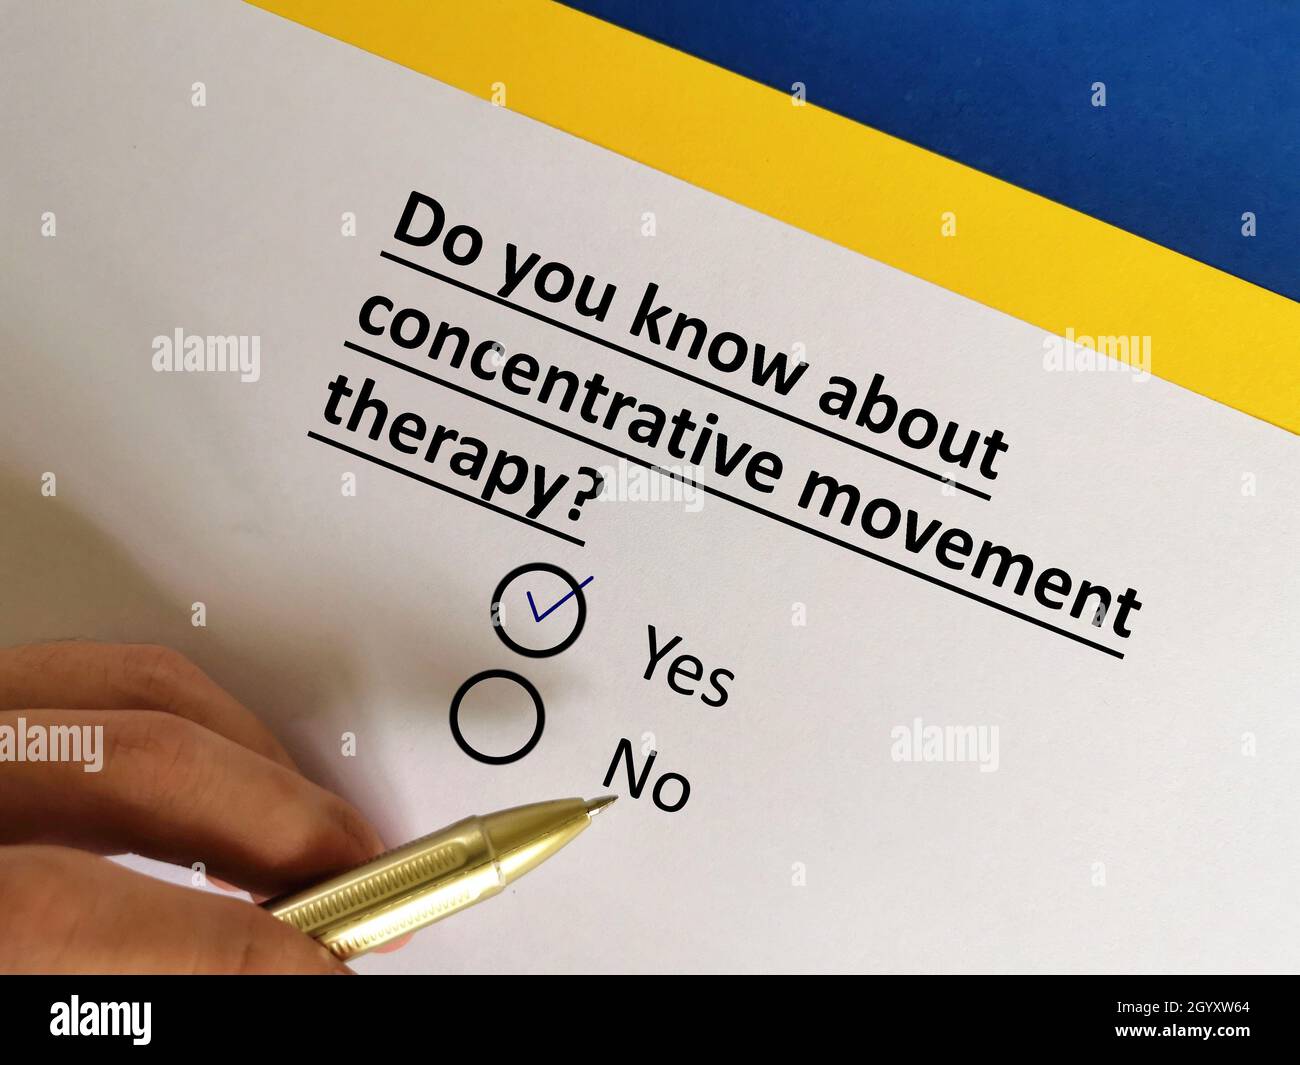 One person is answering question about psychotherapy. The person knows about conventrative movement therapy Stock Photo